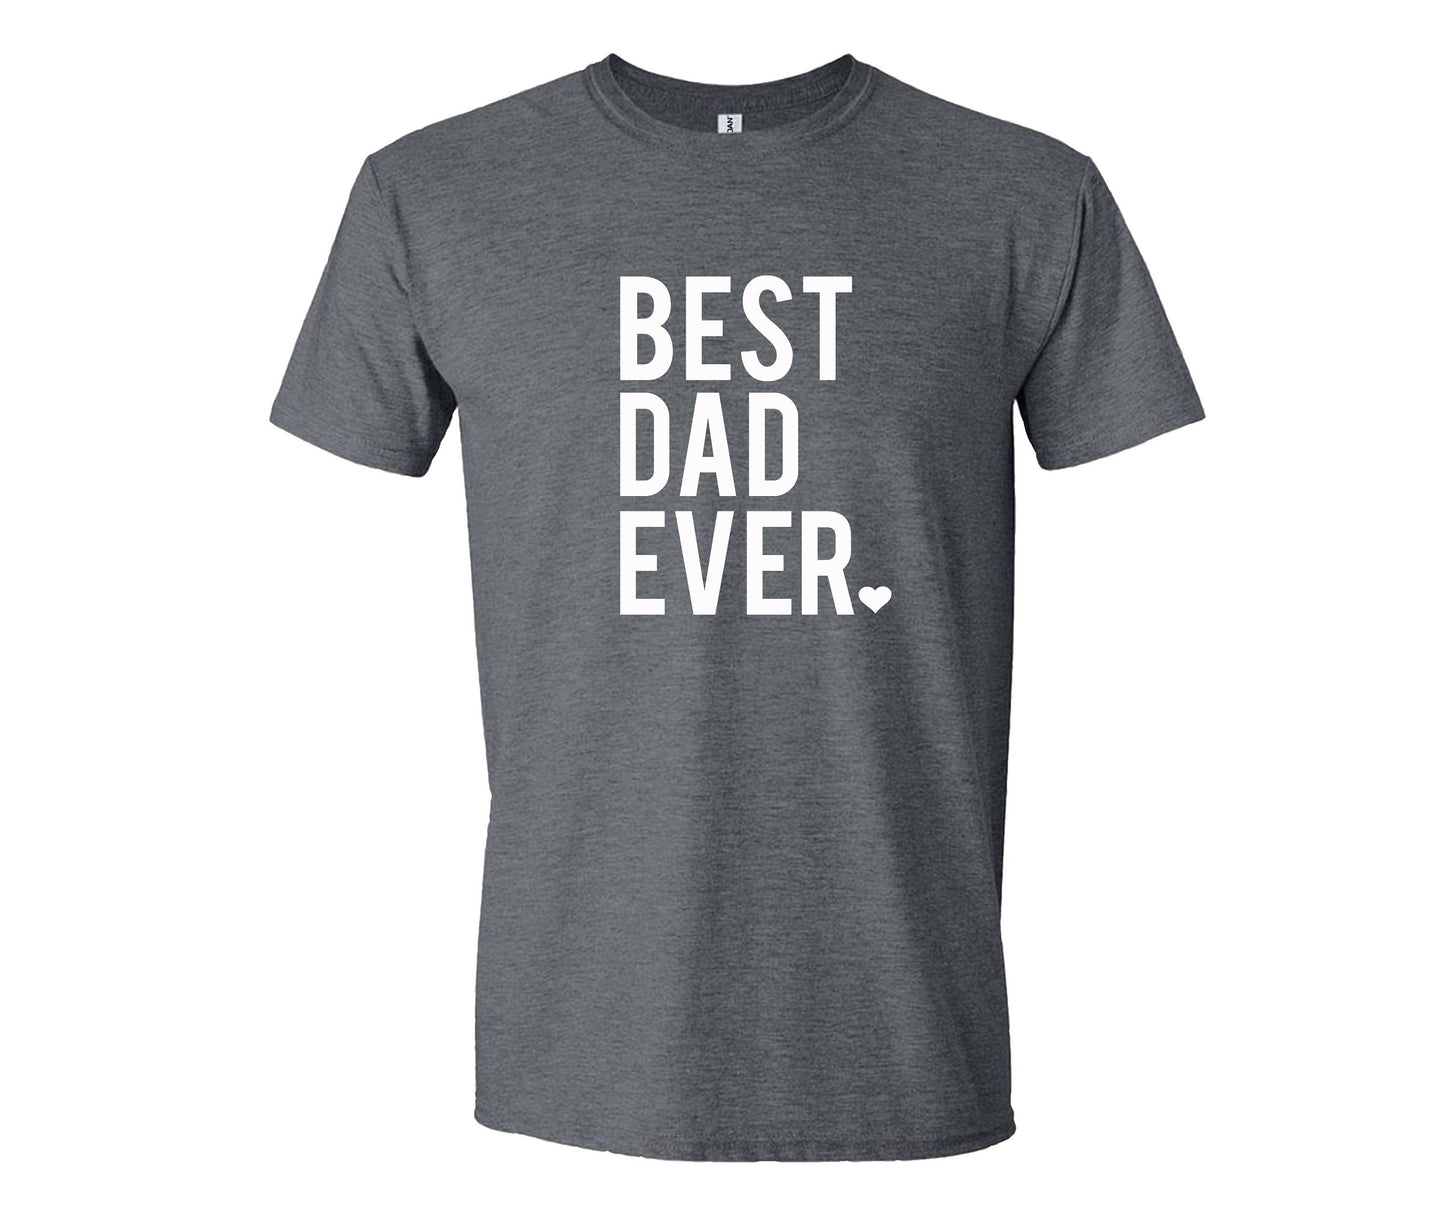 Dad Gift - Best Dad Ever Shirt - Best Dad Gift - Dad Shirt - Funny Fathers Gift - Husband Gift - Funny Dad Tshirt - Dad Birthday Gift